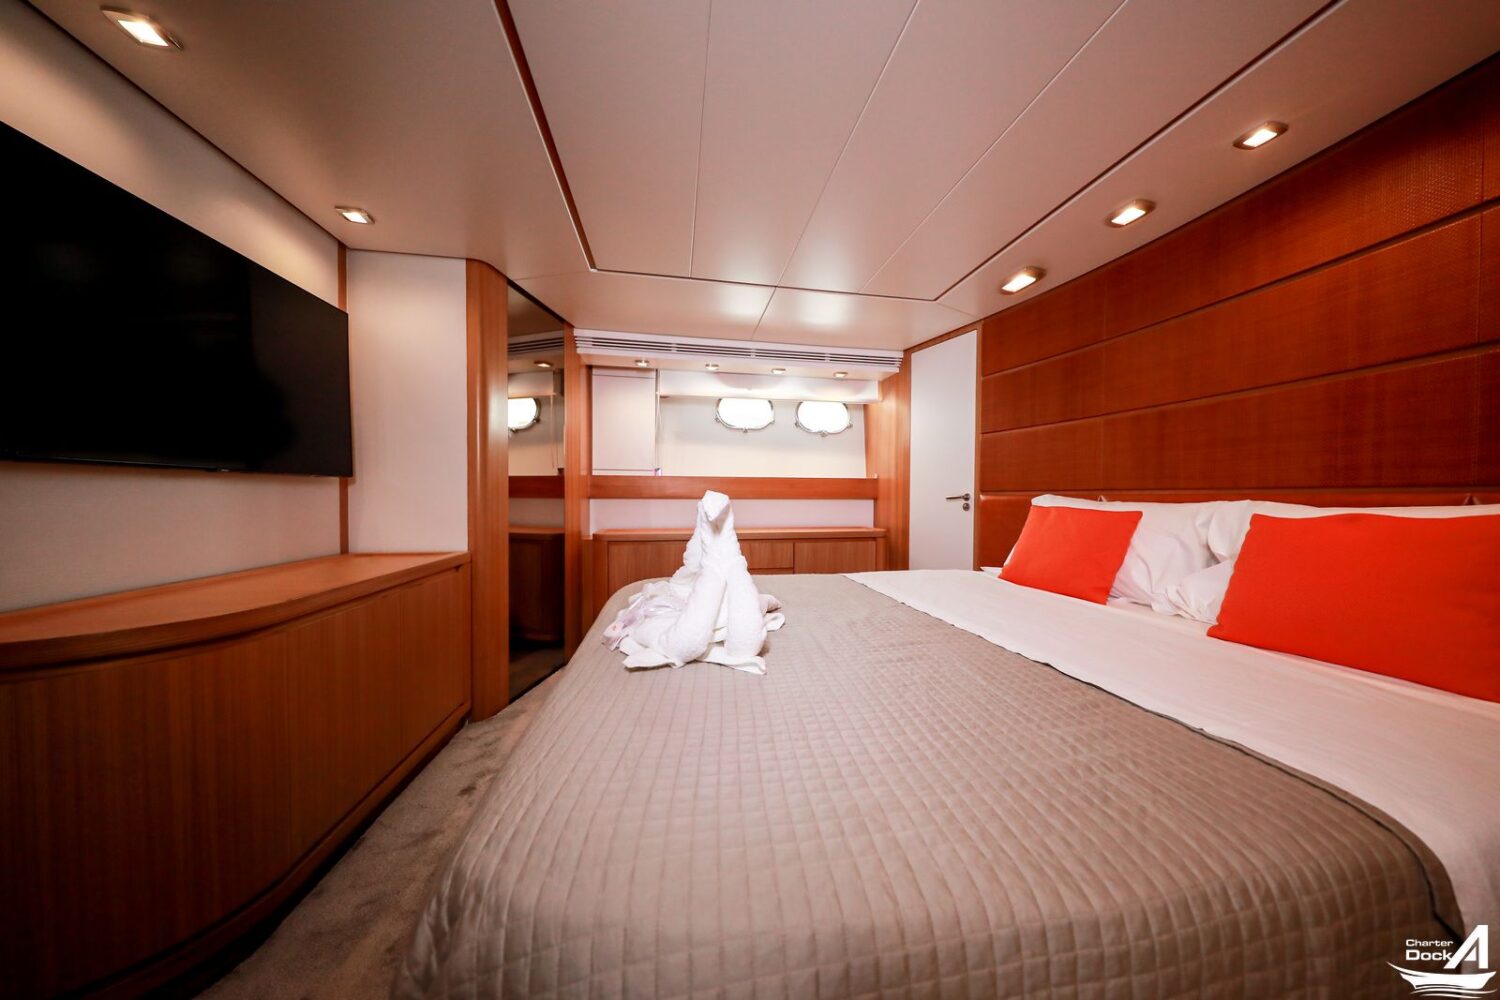 Yacht interior featuring opulent furnishings and large windows overlooking the sea